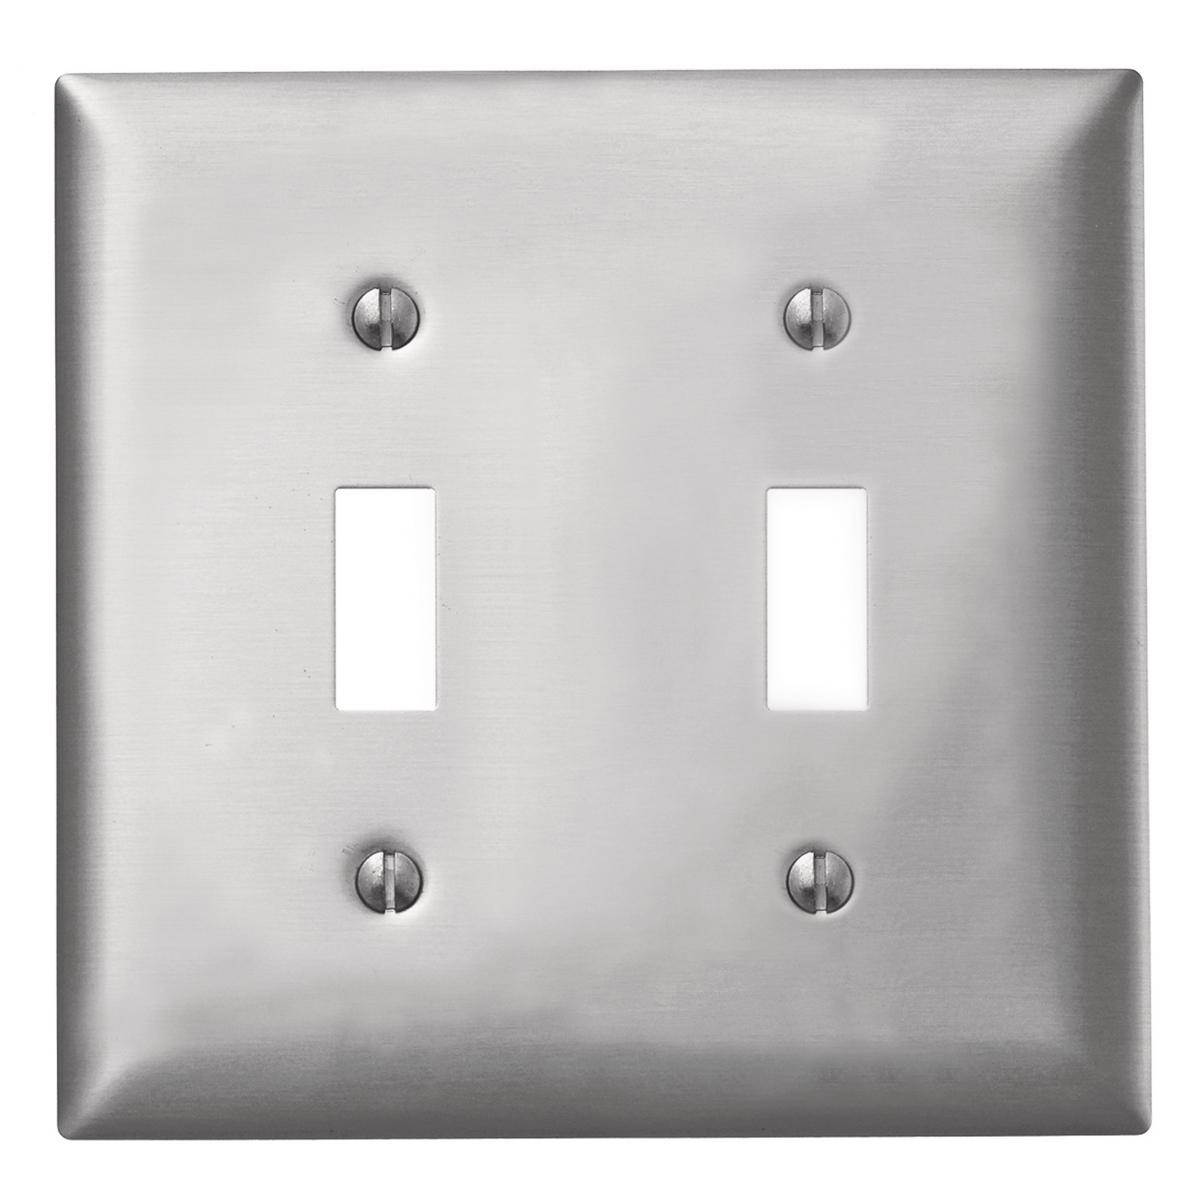 Hubbell SA2 Wallplates and Boxes, Metallic Plates, 1- Gang, 1) Toggle Opening, Standard Size, Aluminum  ; Non-magnetic and corrosion resistant ; Finish is lacquer coated to inhibit oxidation ; Protective plastic film helps to prevent scratches and damage ; Protective